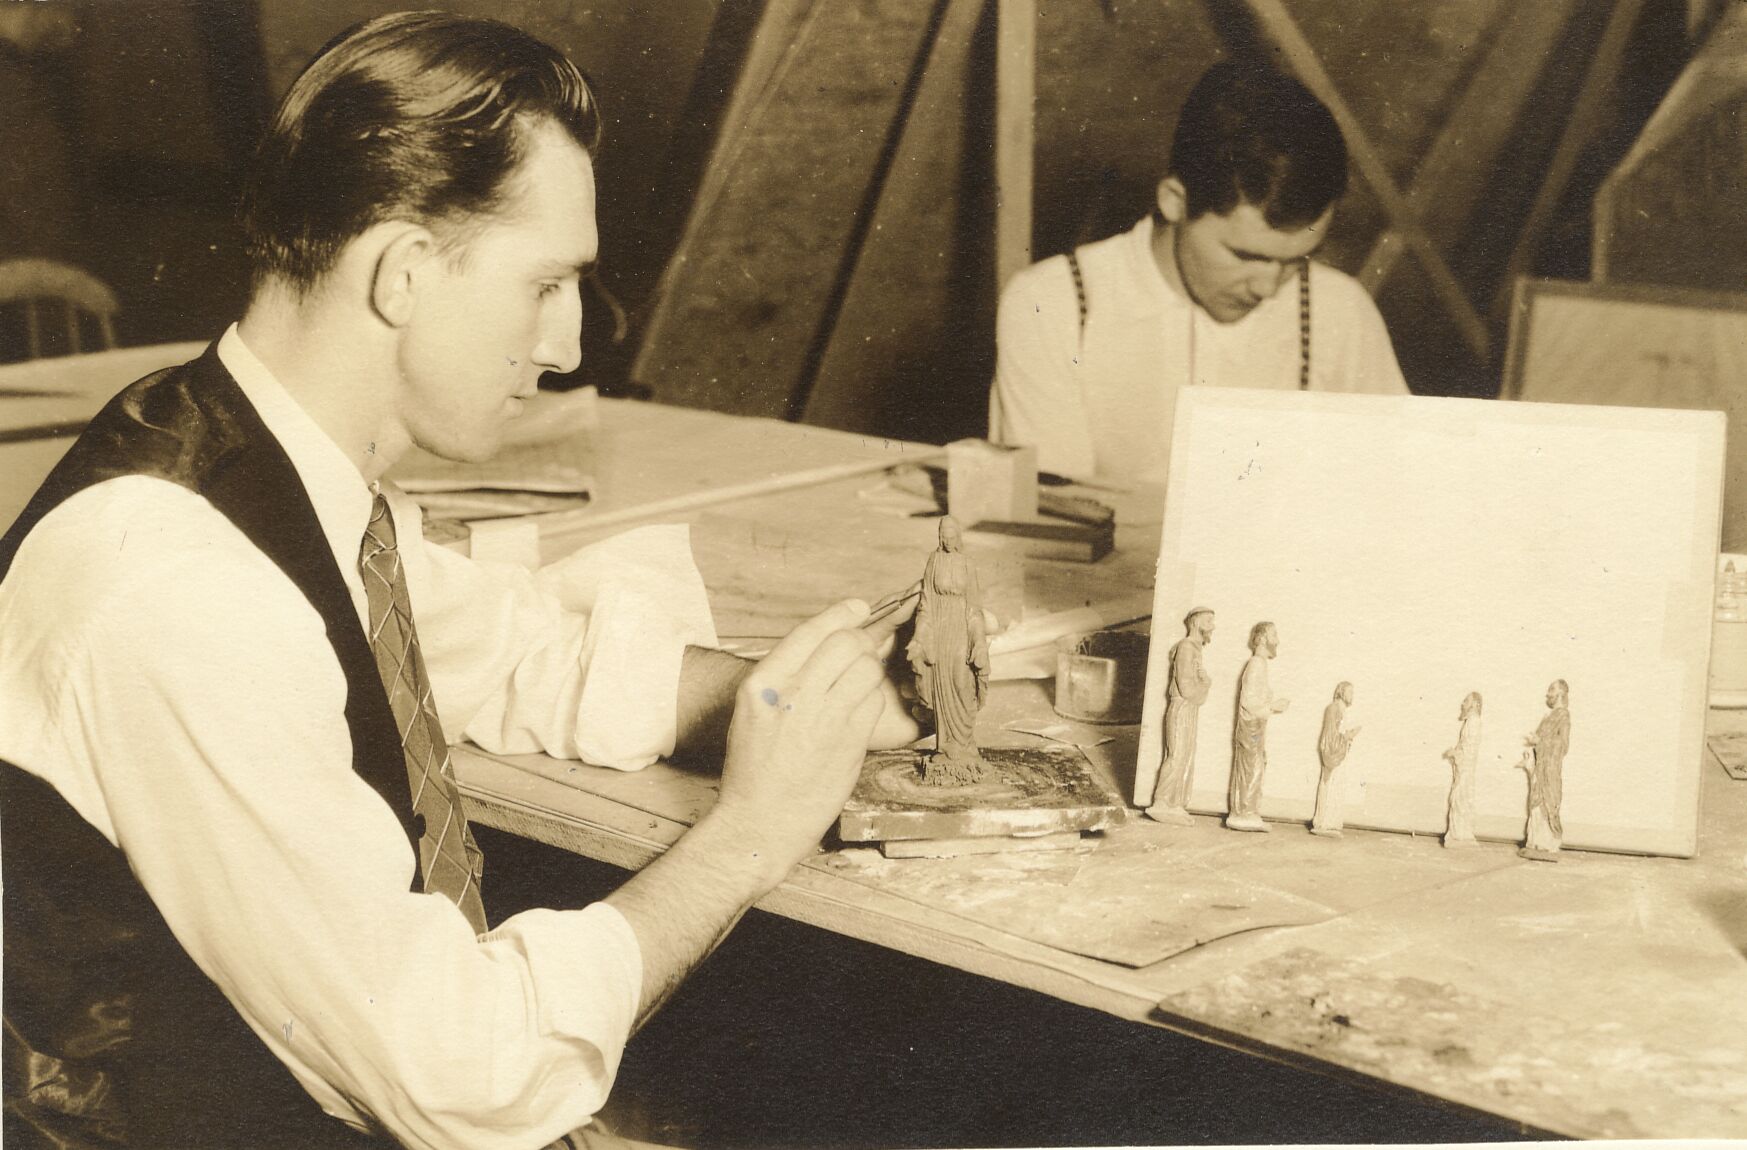 historic photo of artists at work, sculpting